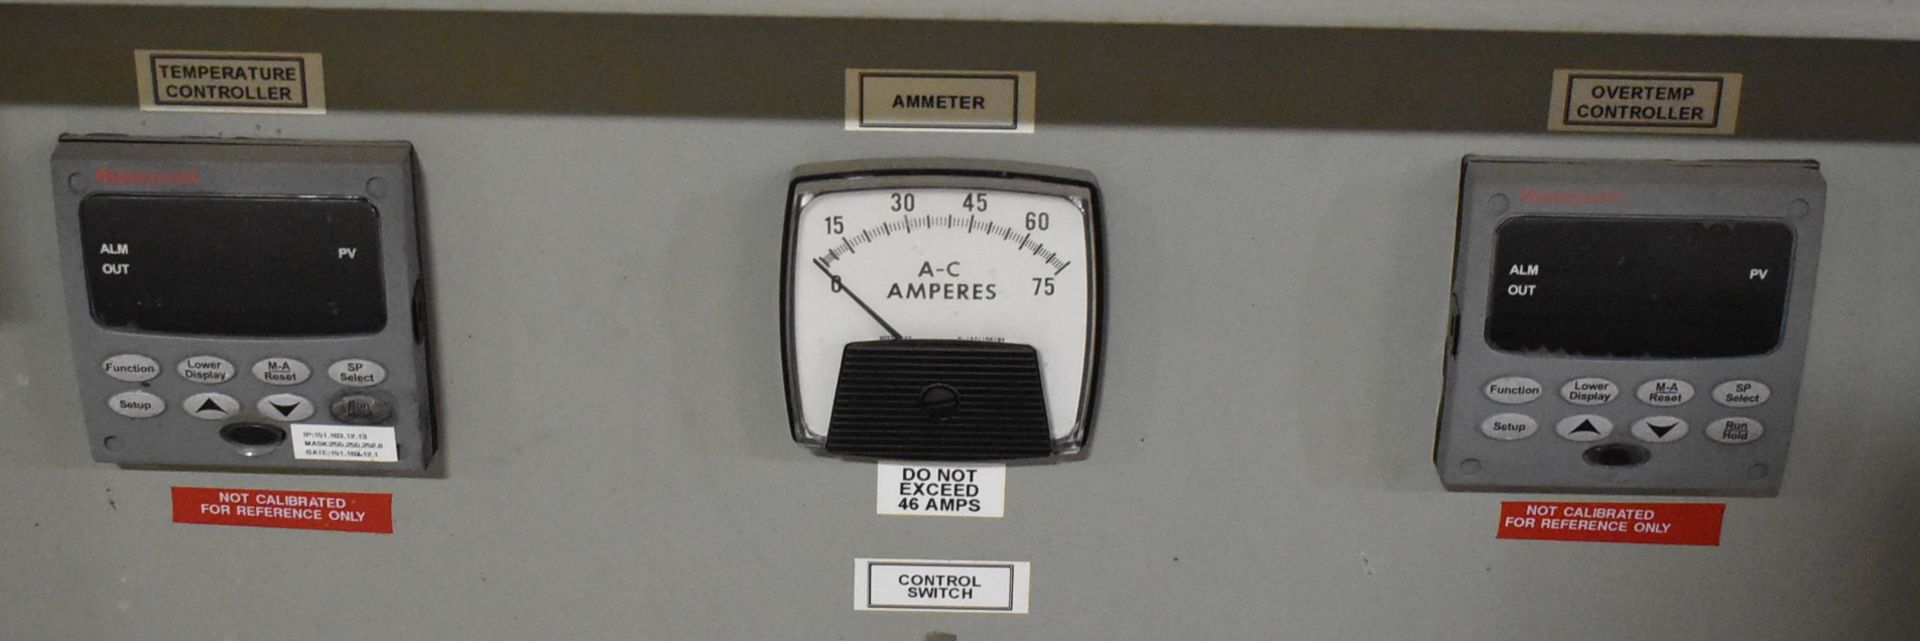 LUCIFER HS3-M24 ELECTRIC BOX FURNACE WITH 2450 DEG. F. MAX. TEMPERATURE, 18.5 KW, 12"X19"X23"D - Image 2 of 5